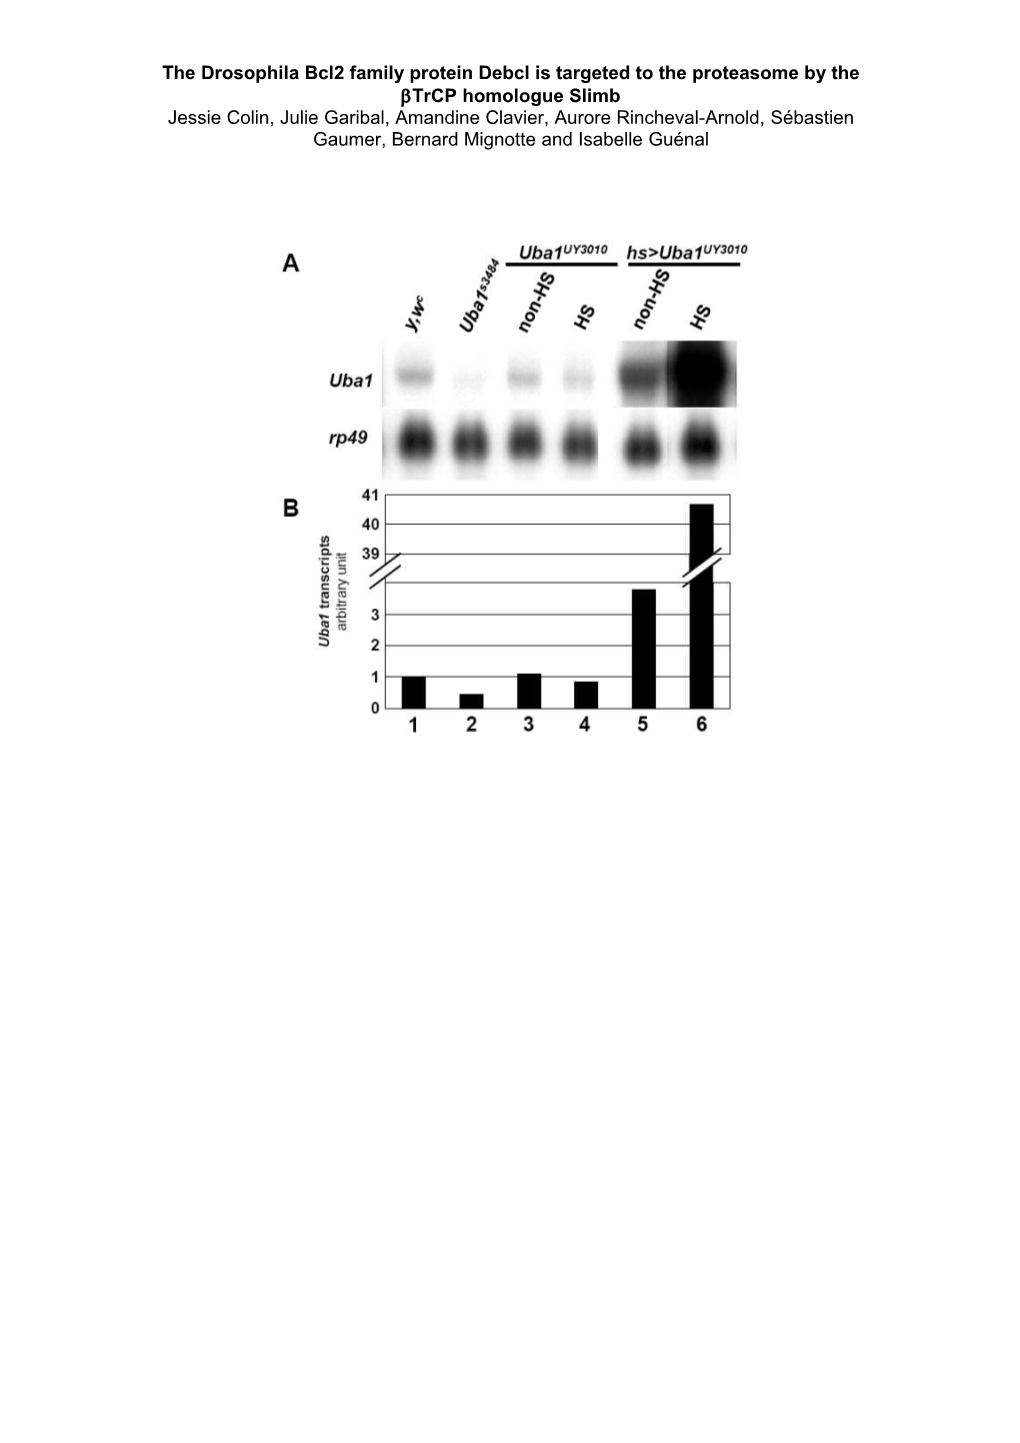 The Drosophila Bcl2 Family Protein Debcl Is Targeted to the Proteasome by the Btrcp Homologue